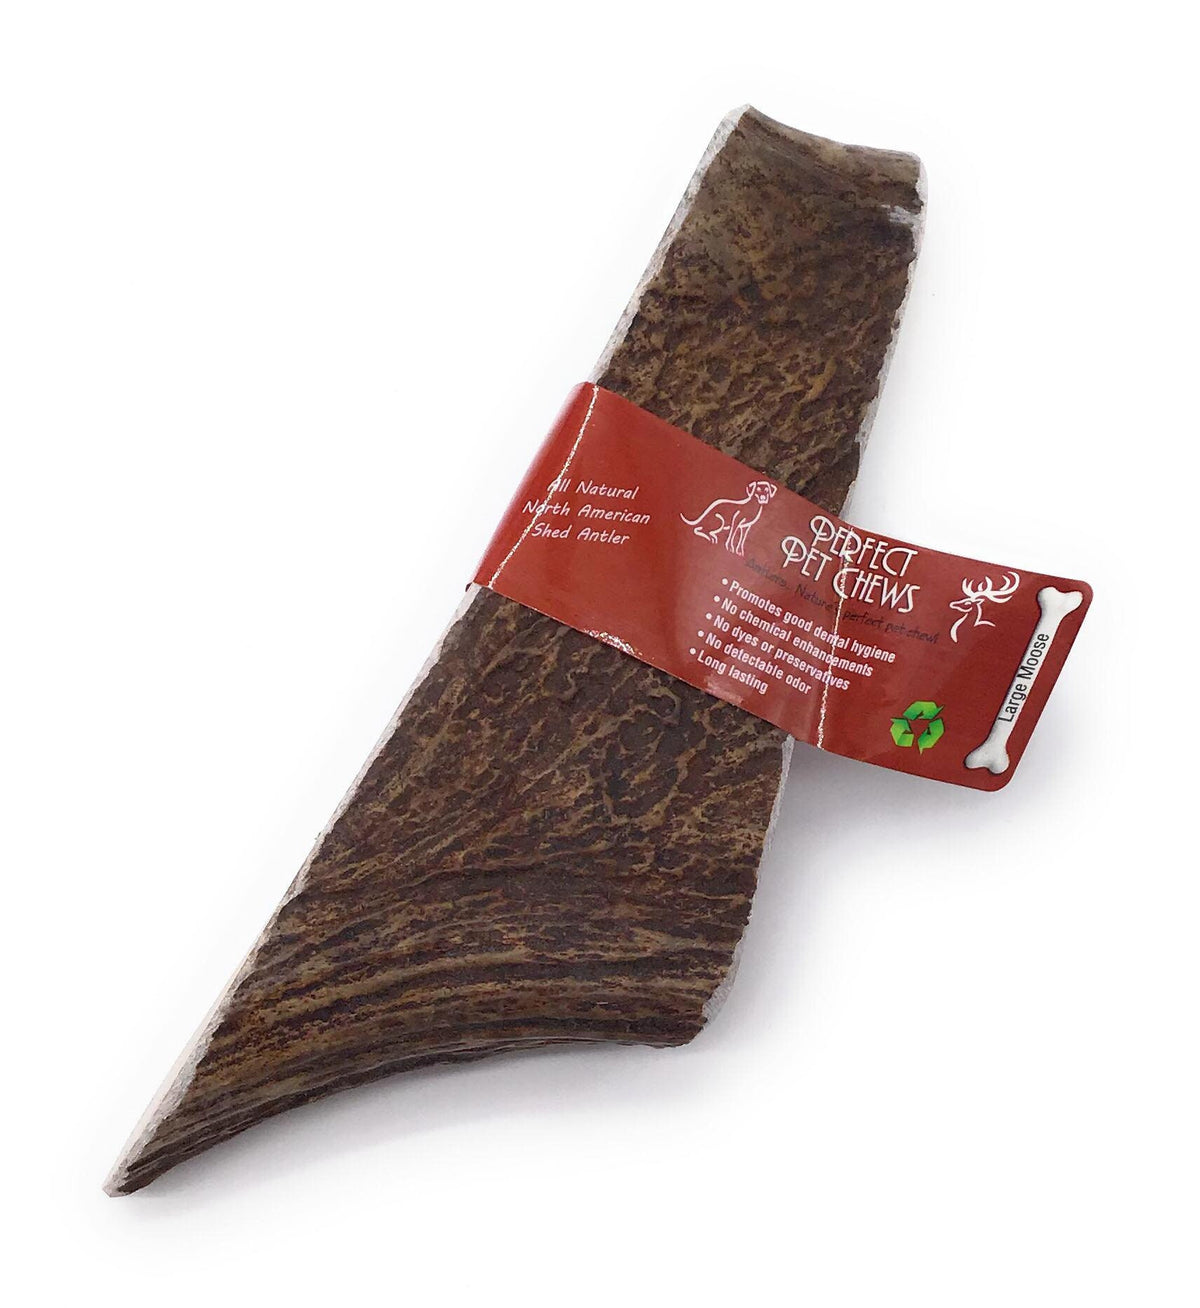 Moose Antler Dog Chew - All Natural, Grade A, Premium Antler Dog Treats, Organic Dog Chews, Naturally Shed Antlers from USA